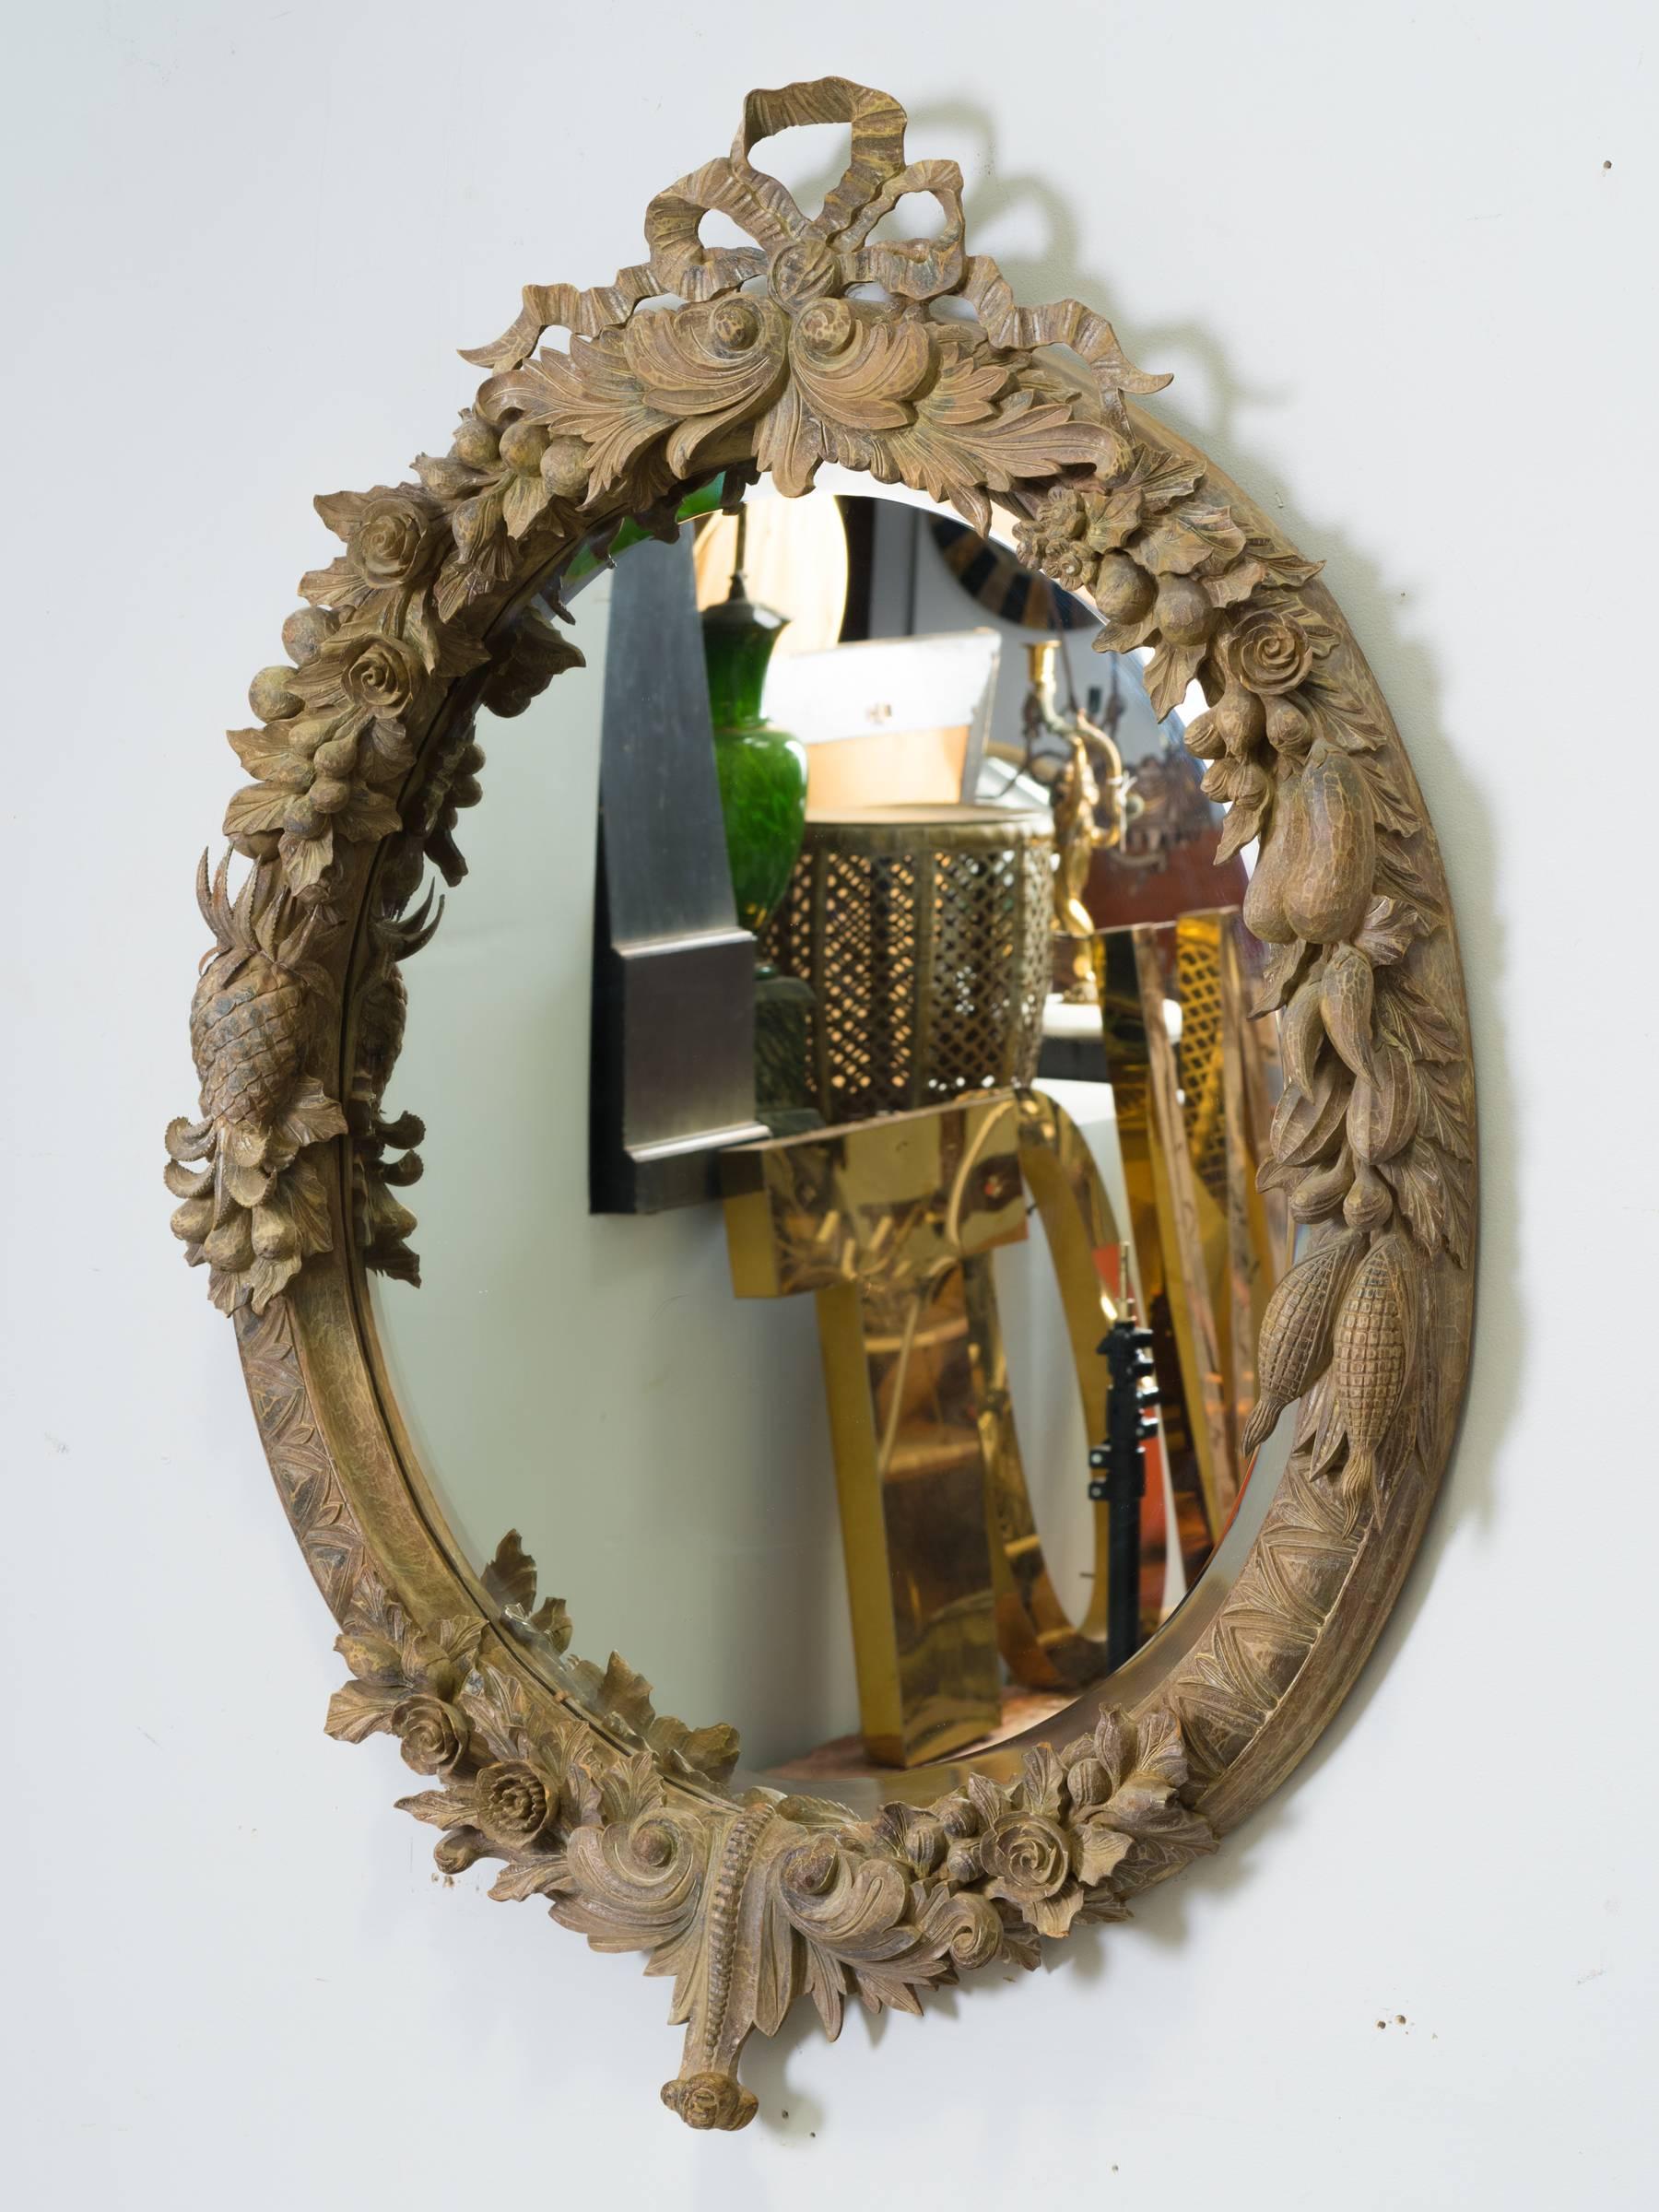 Carved wood mirror with fruit and floral motif designed by John Richard.